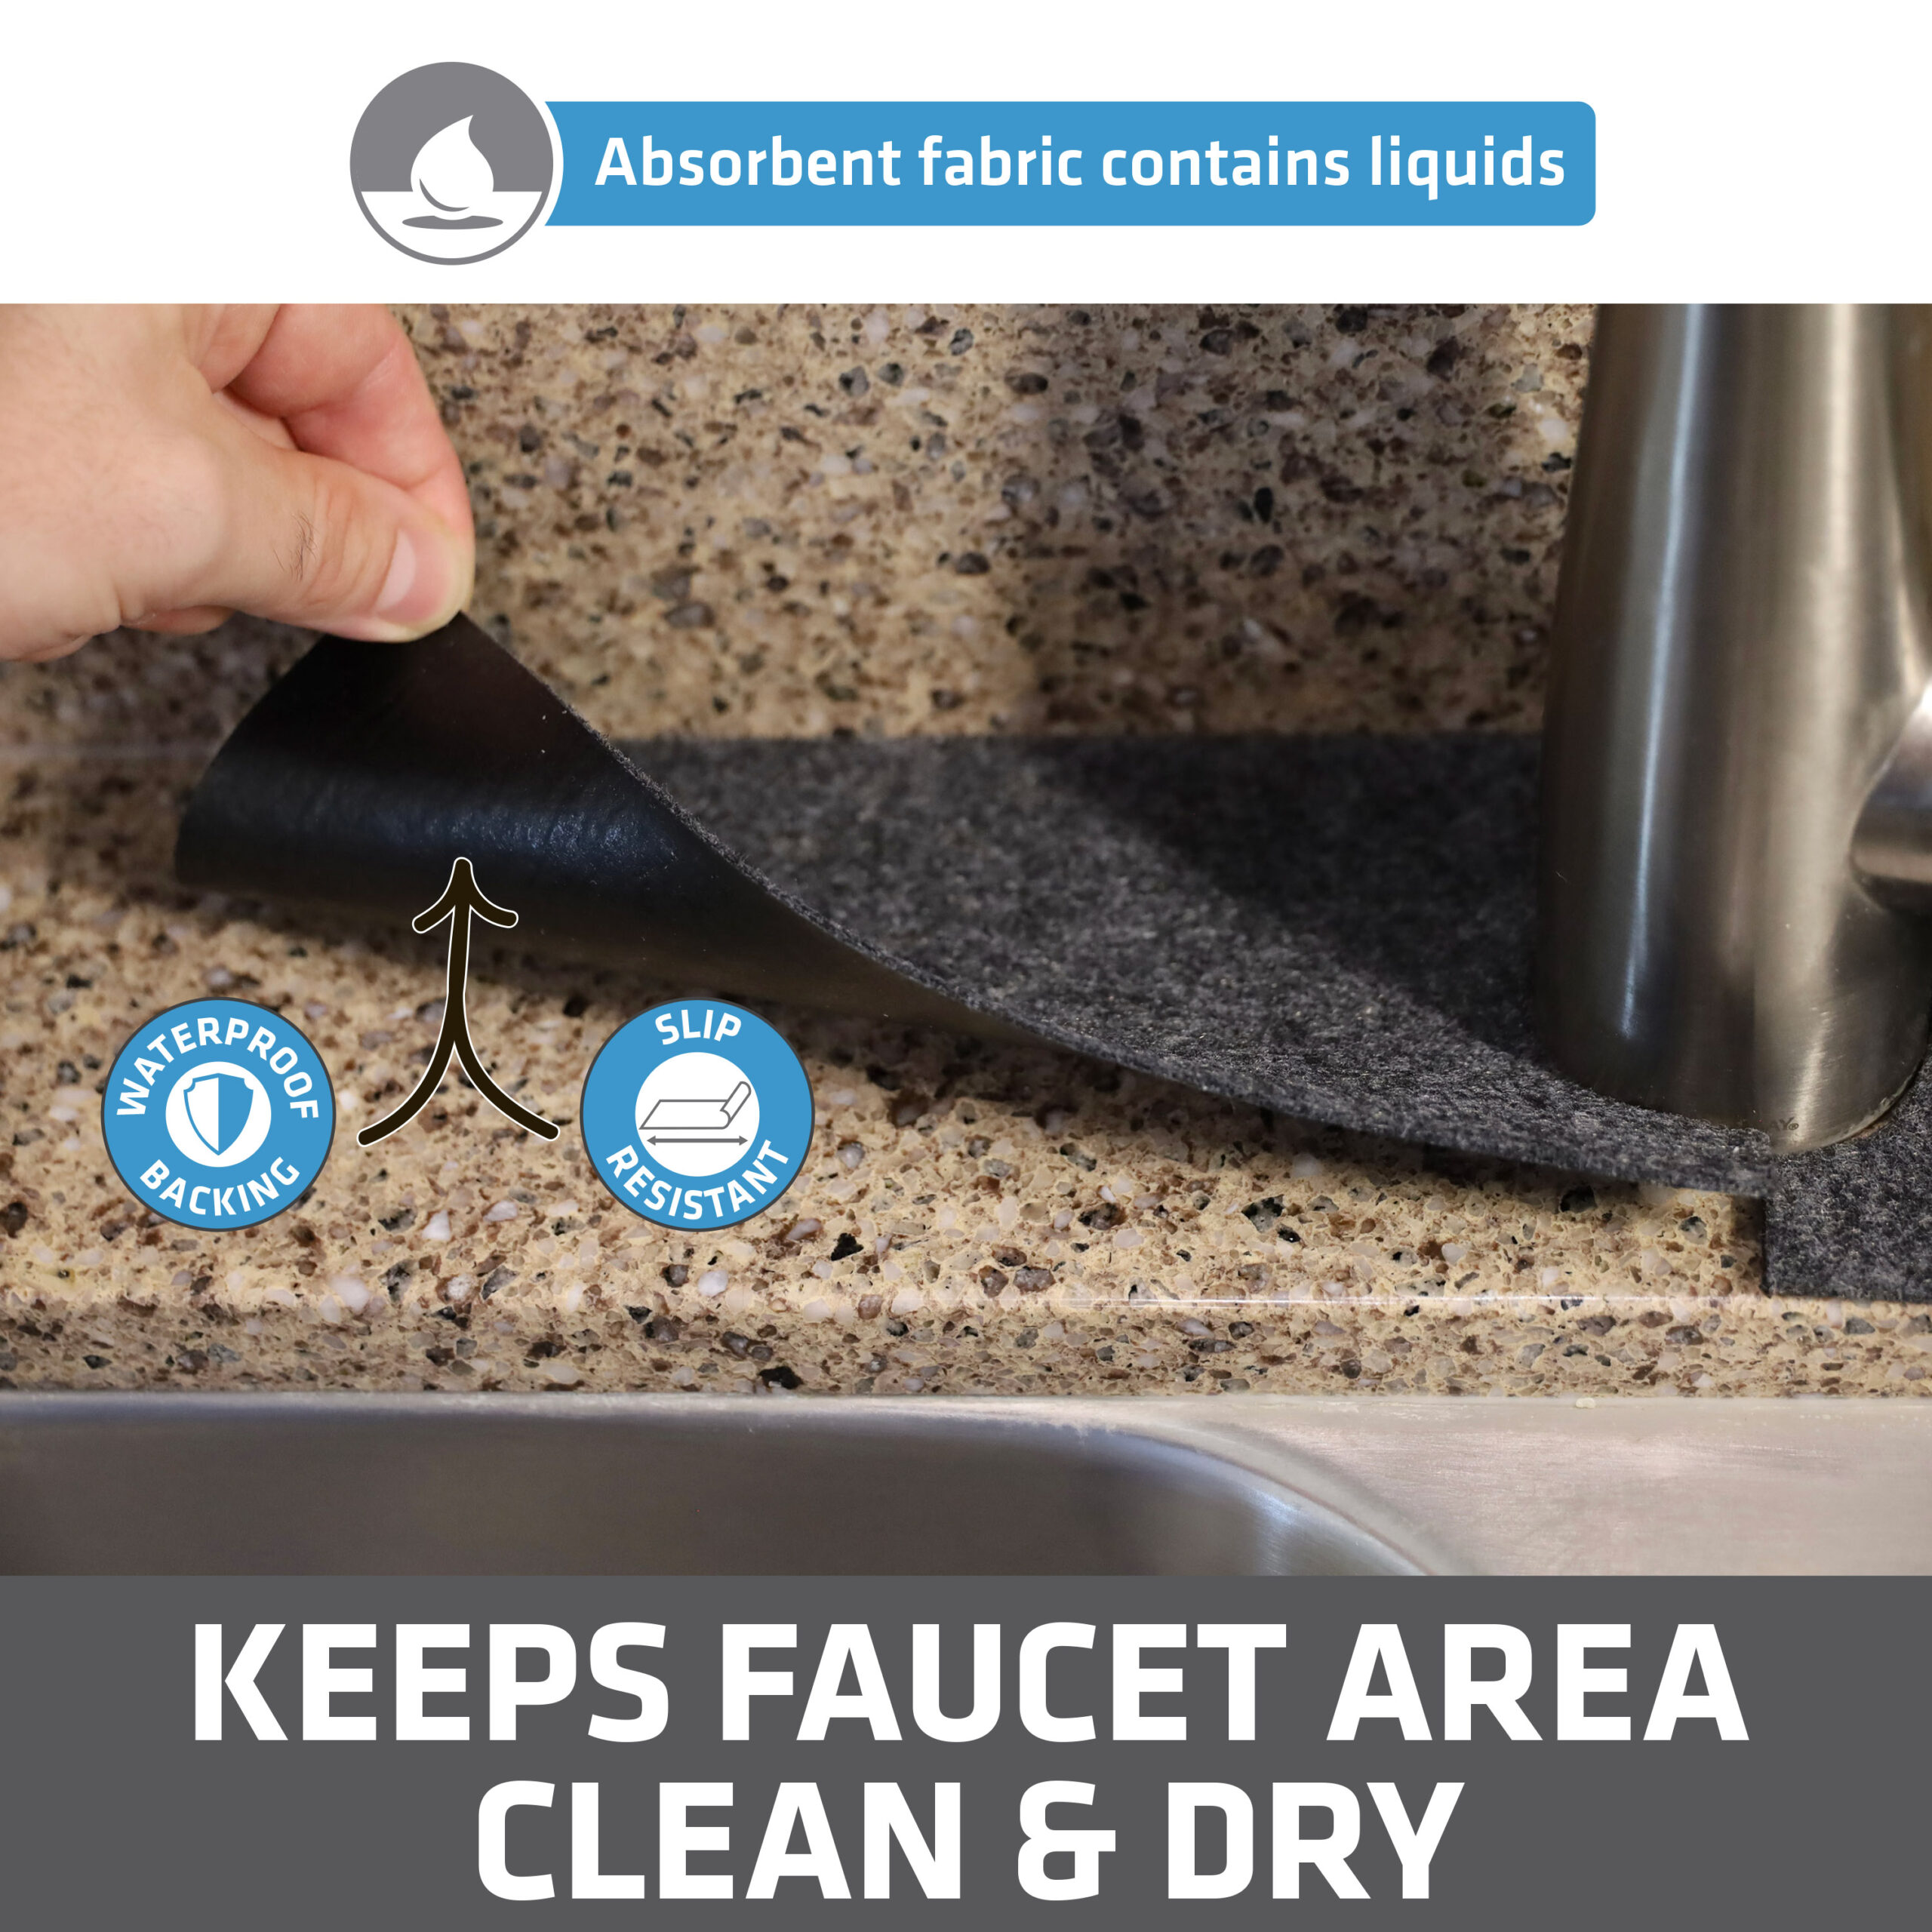 Buy SVK Dream Sink Faucet Mat Splash Guard, Kitchen Sink Draining Pad  Behind Faucet Dish Drying Mat Online at Best Prices in India - JioMart.